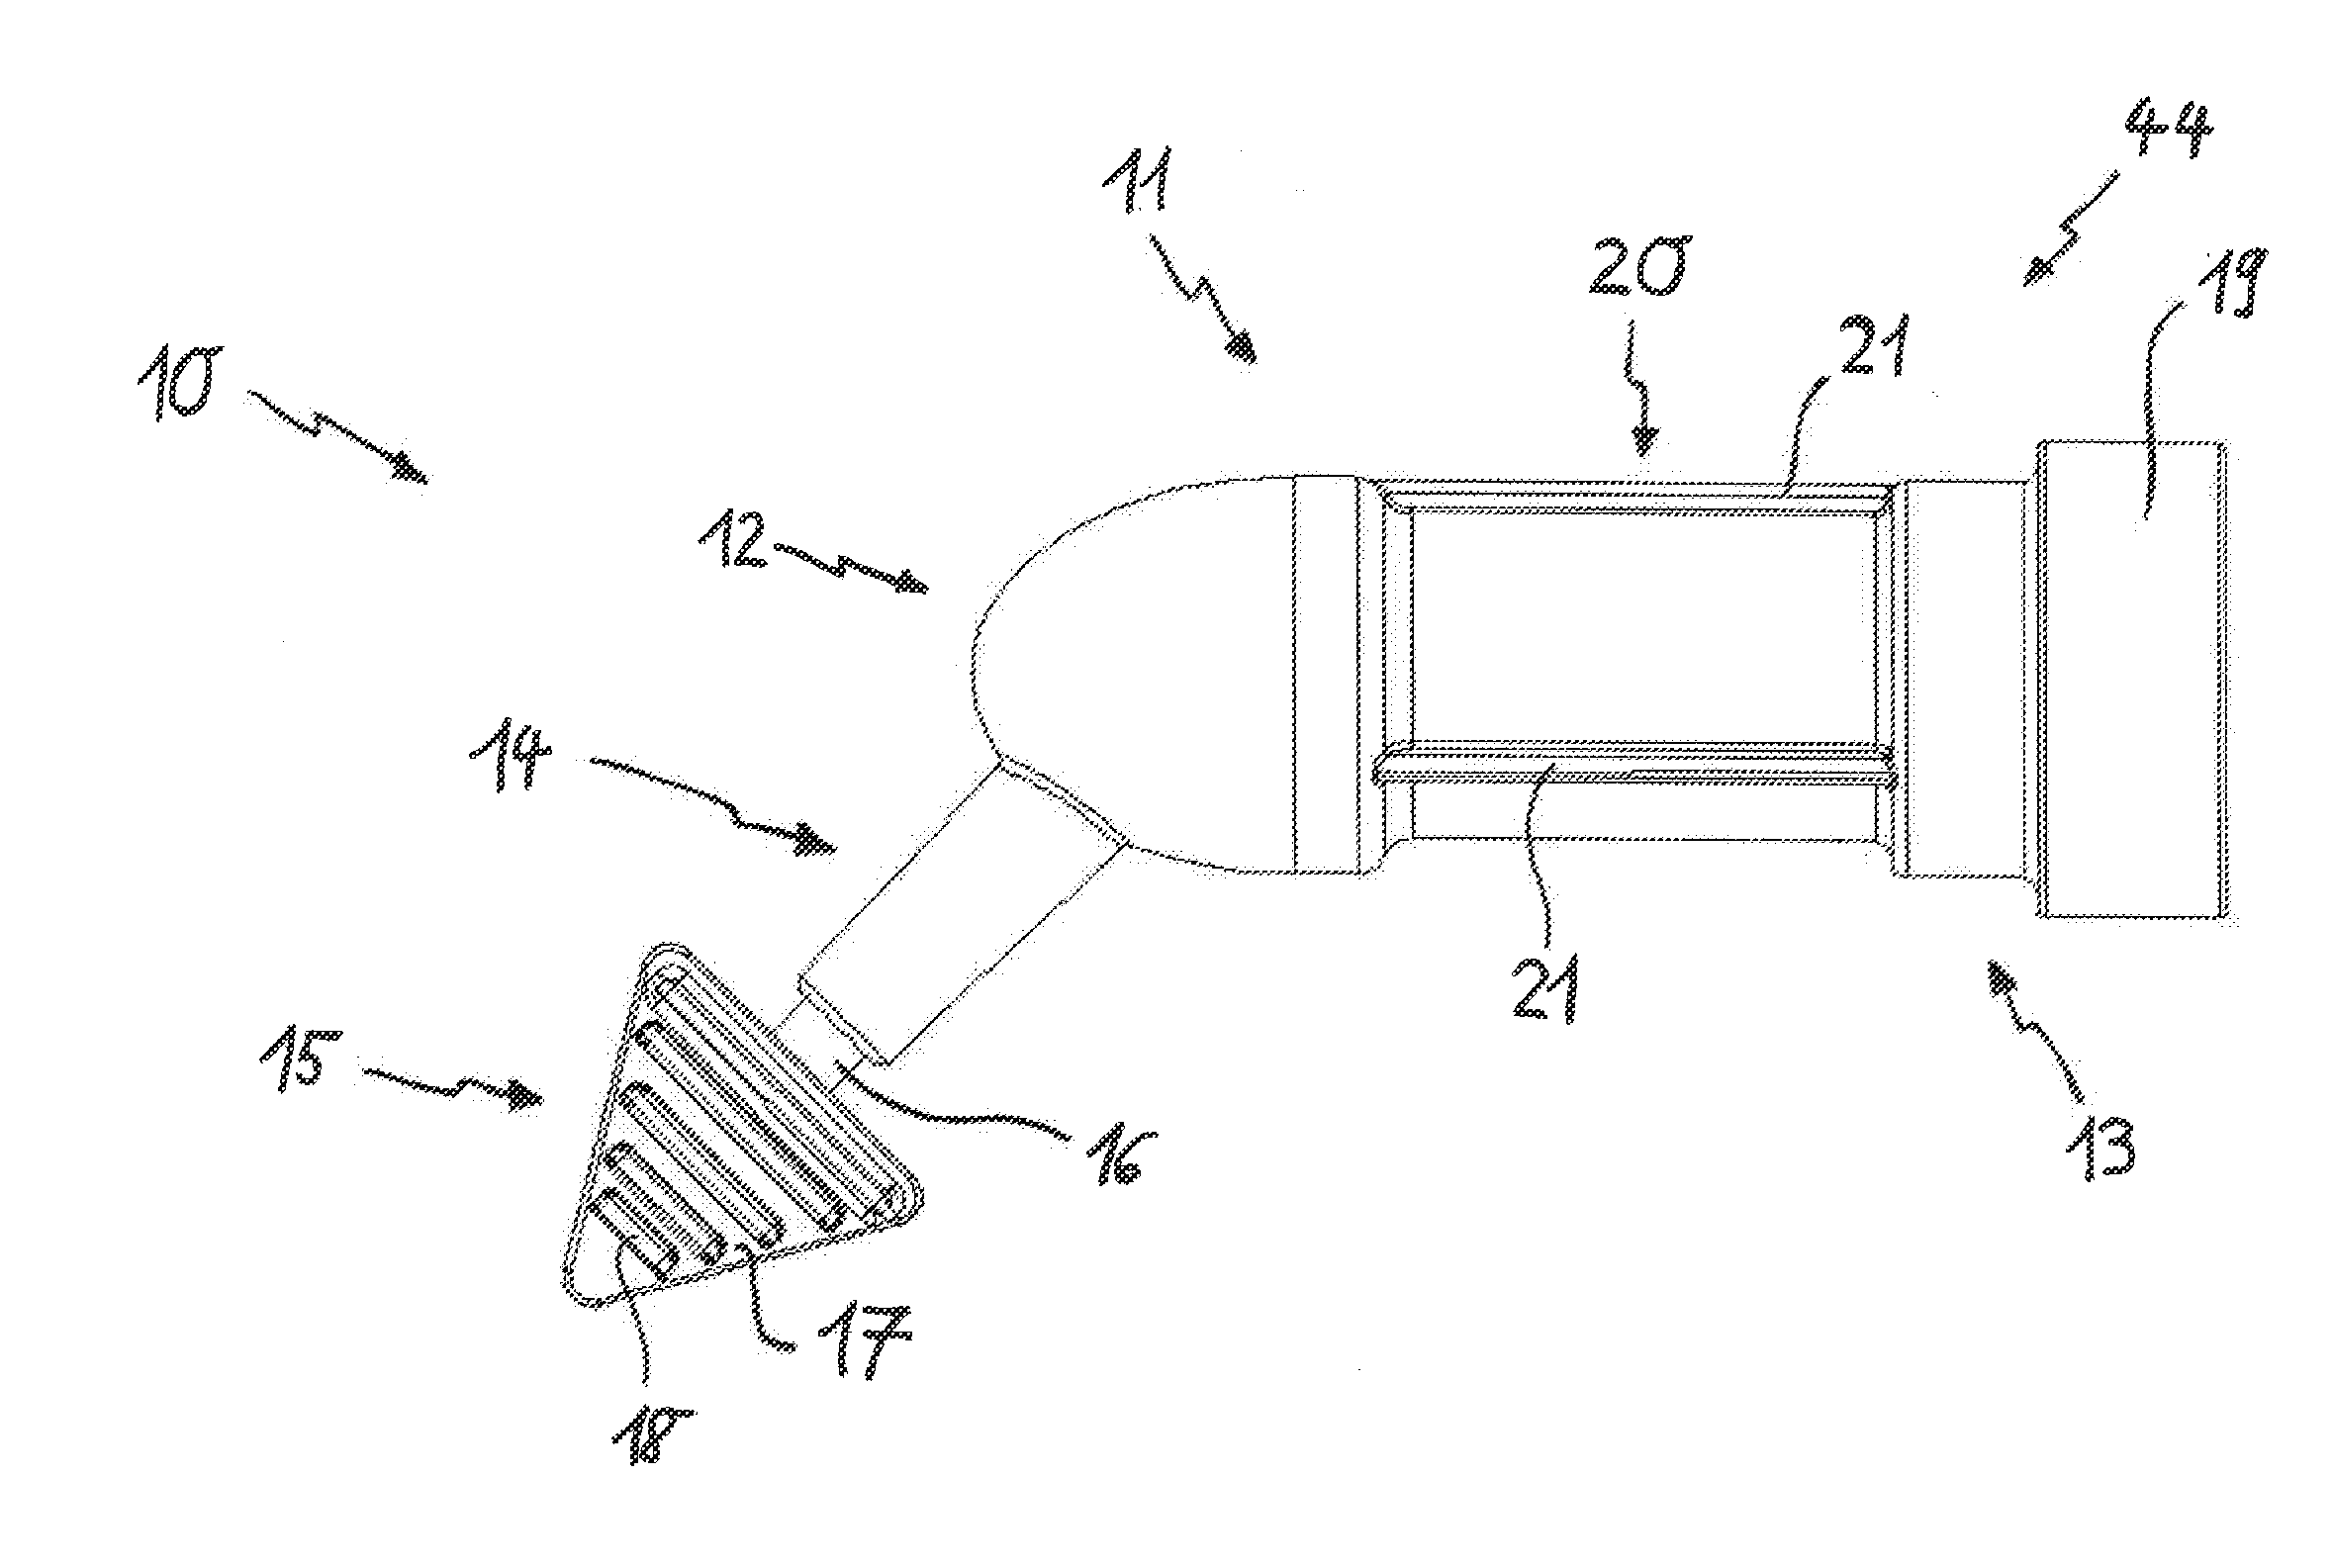 Method for manufacturing a cartridge for containing and meterably dispensing a flowable dental material and such a cartridge